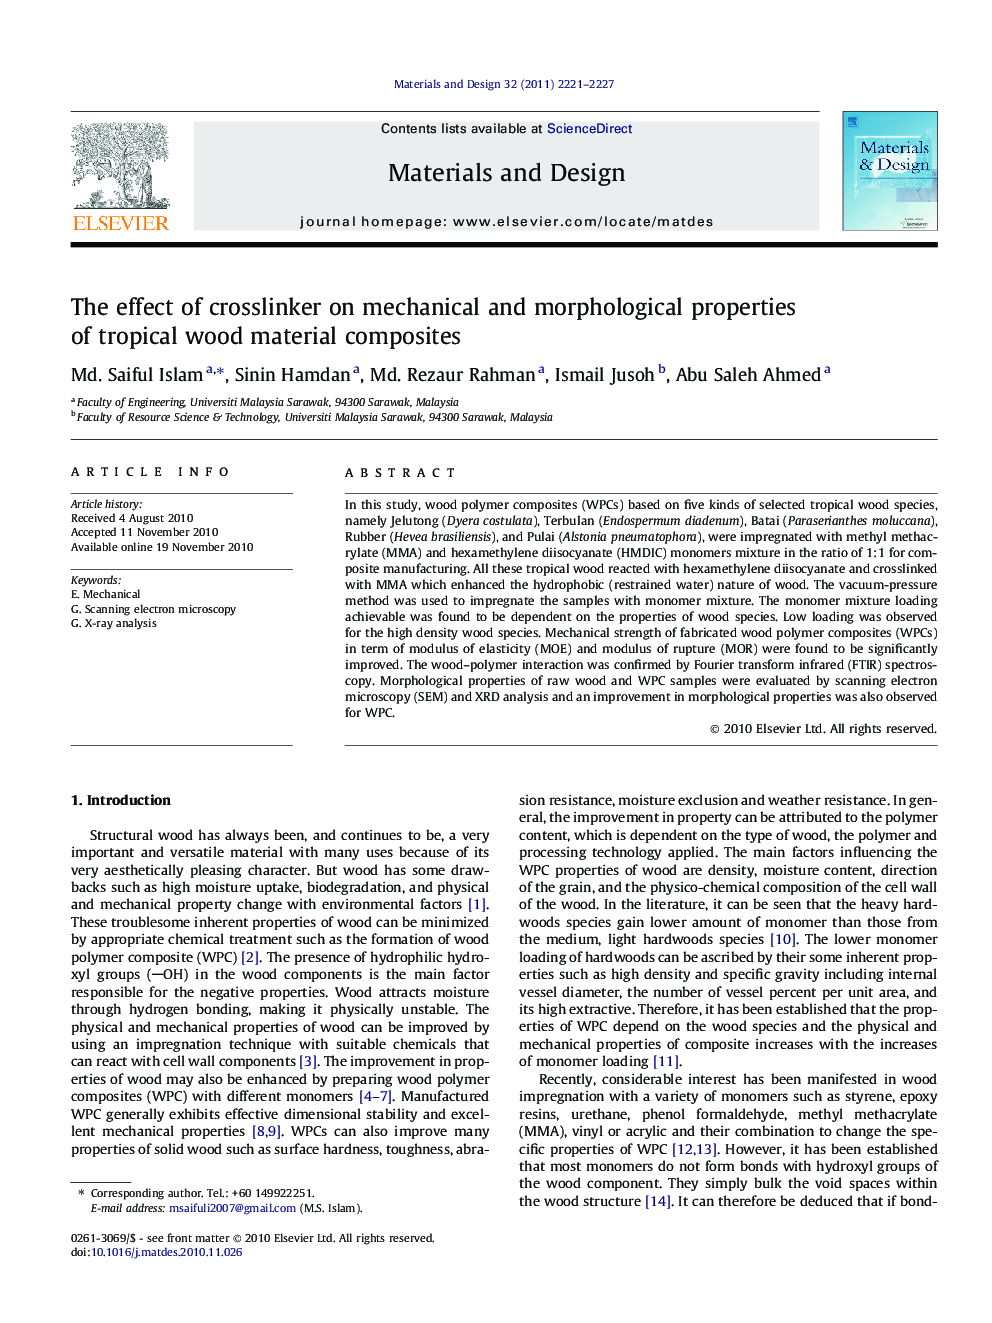 The effect of crosslinker on mechanical and morphological properties of tropical wood material composites